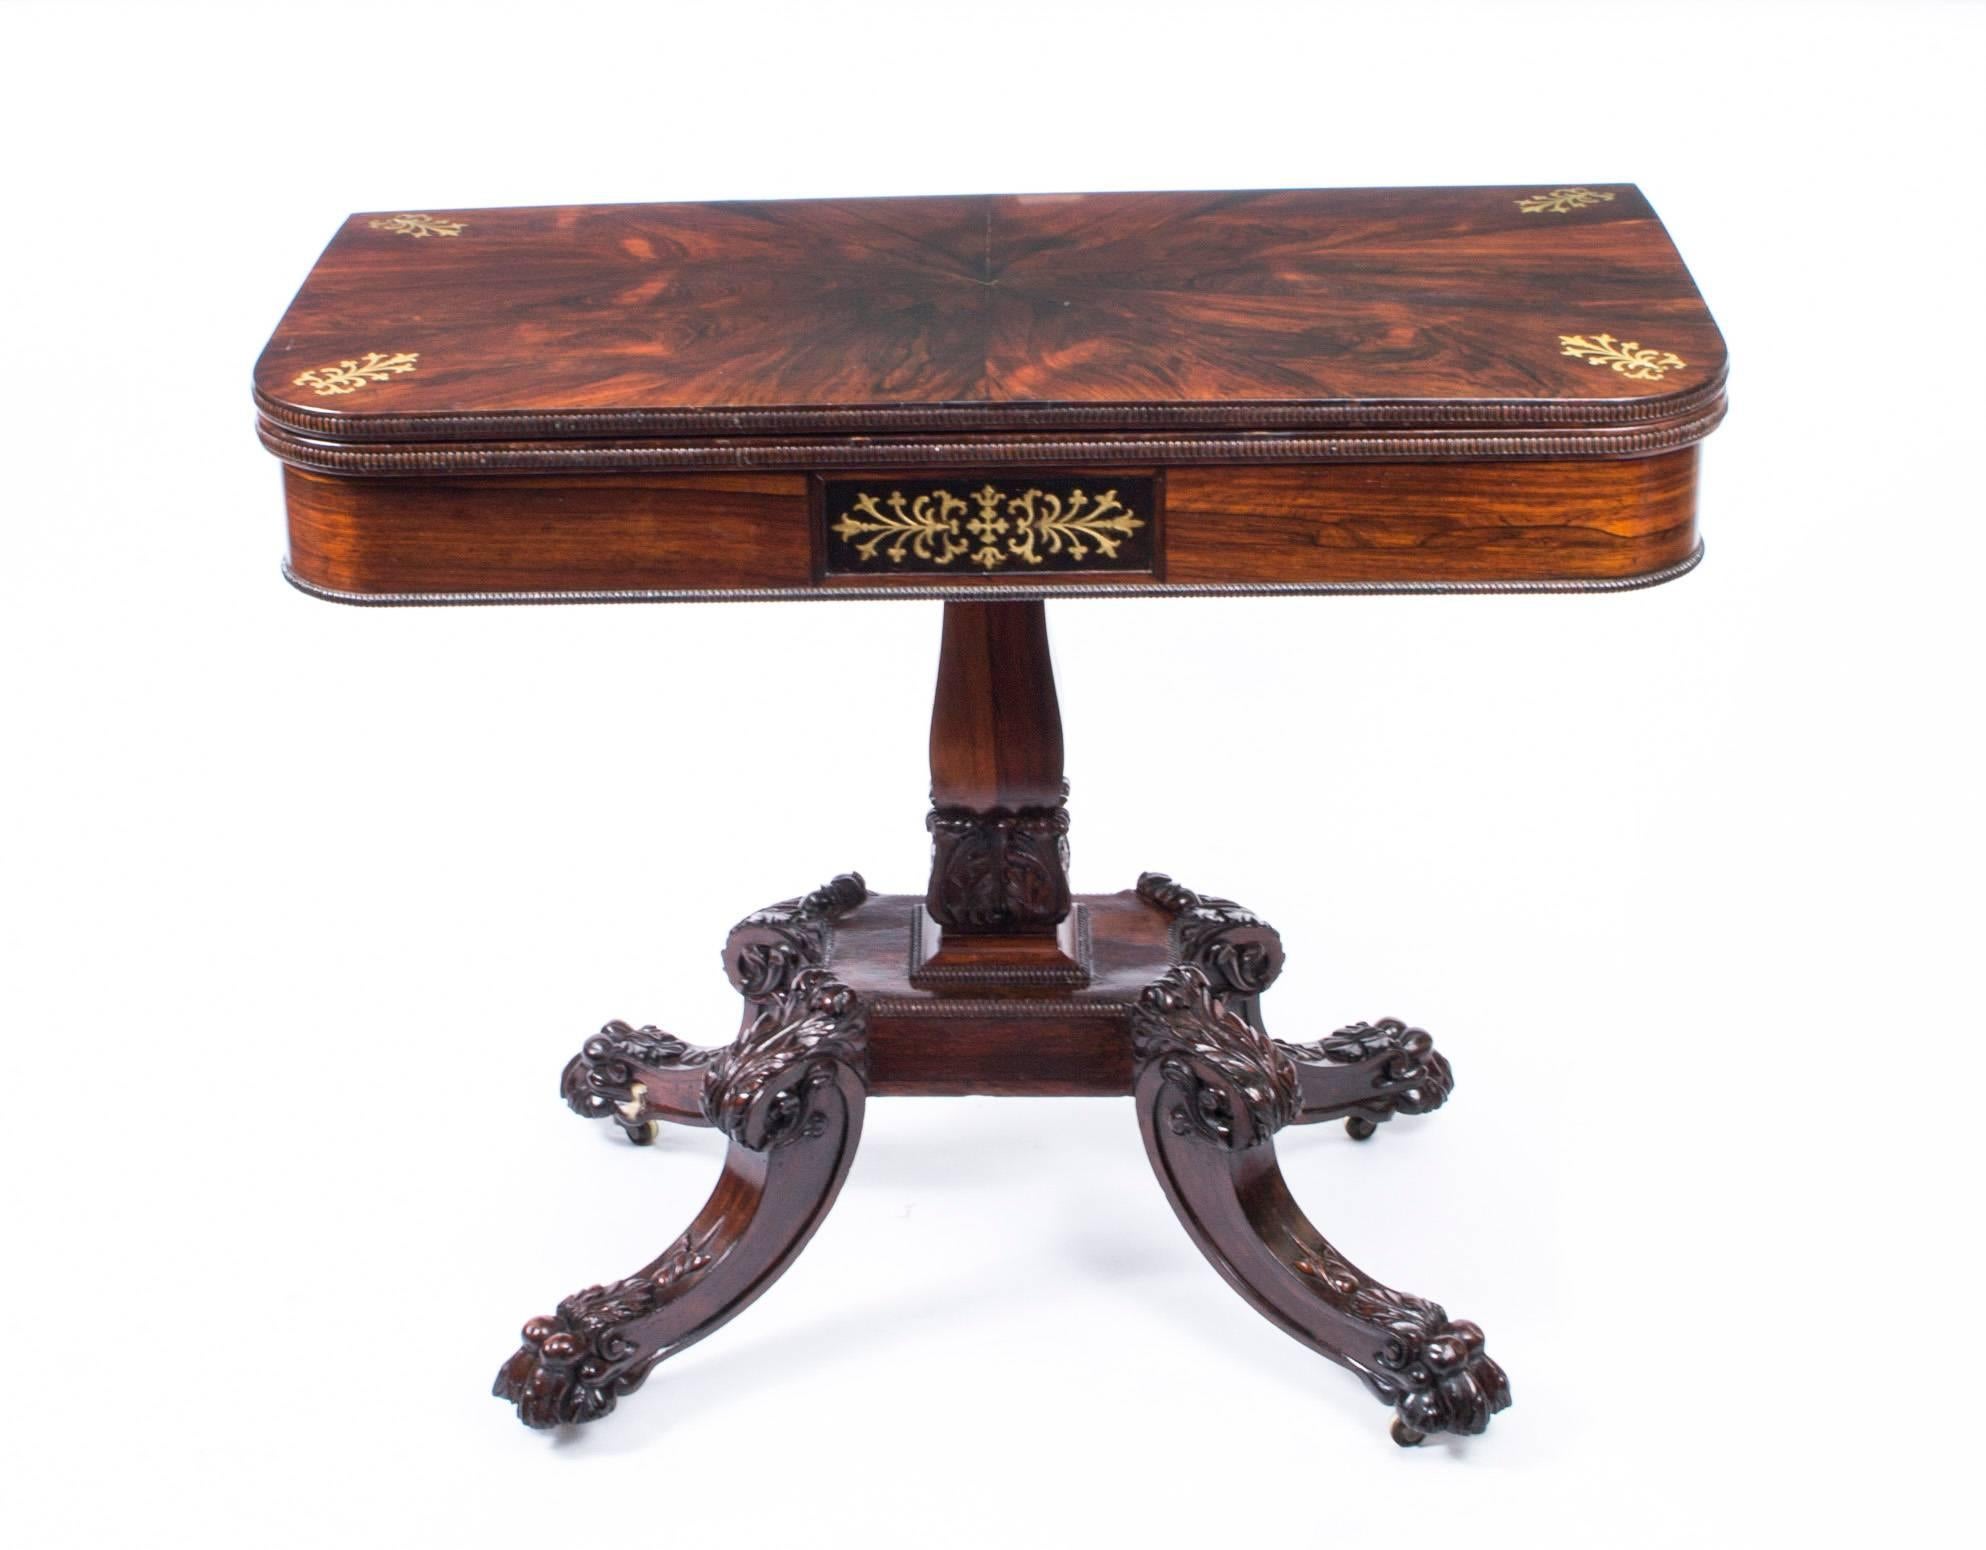 This is a very attractive antique English Regency rosewood and cut brass marquetry card table, circa 1825 in date.

This rounded rectangular card table is made from beautiful rosewood, the folding top enclosing a green baize lined playing surface.